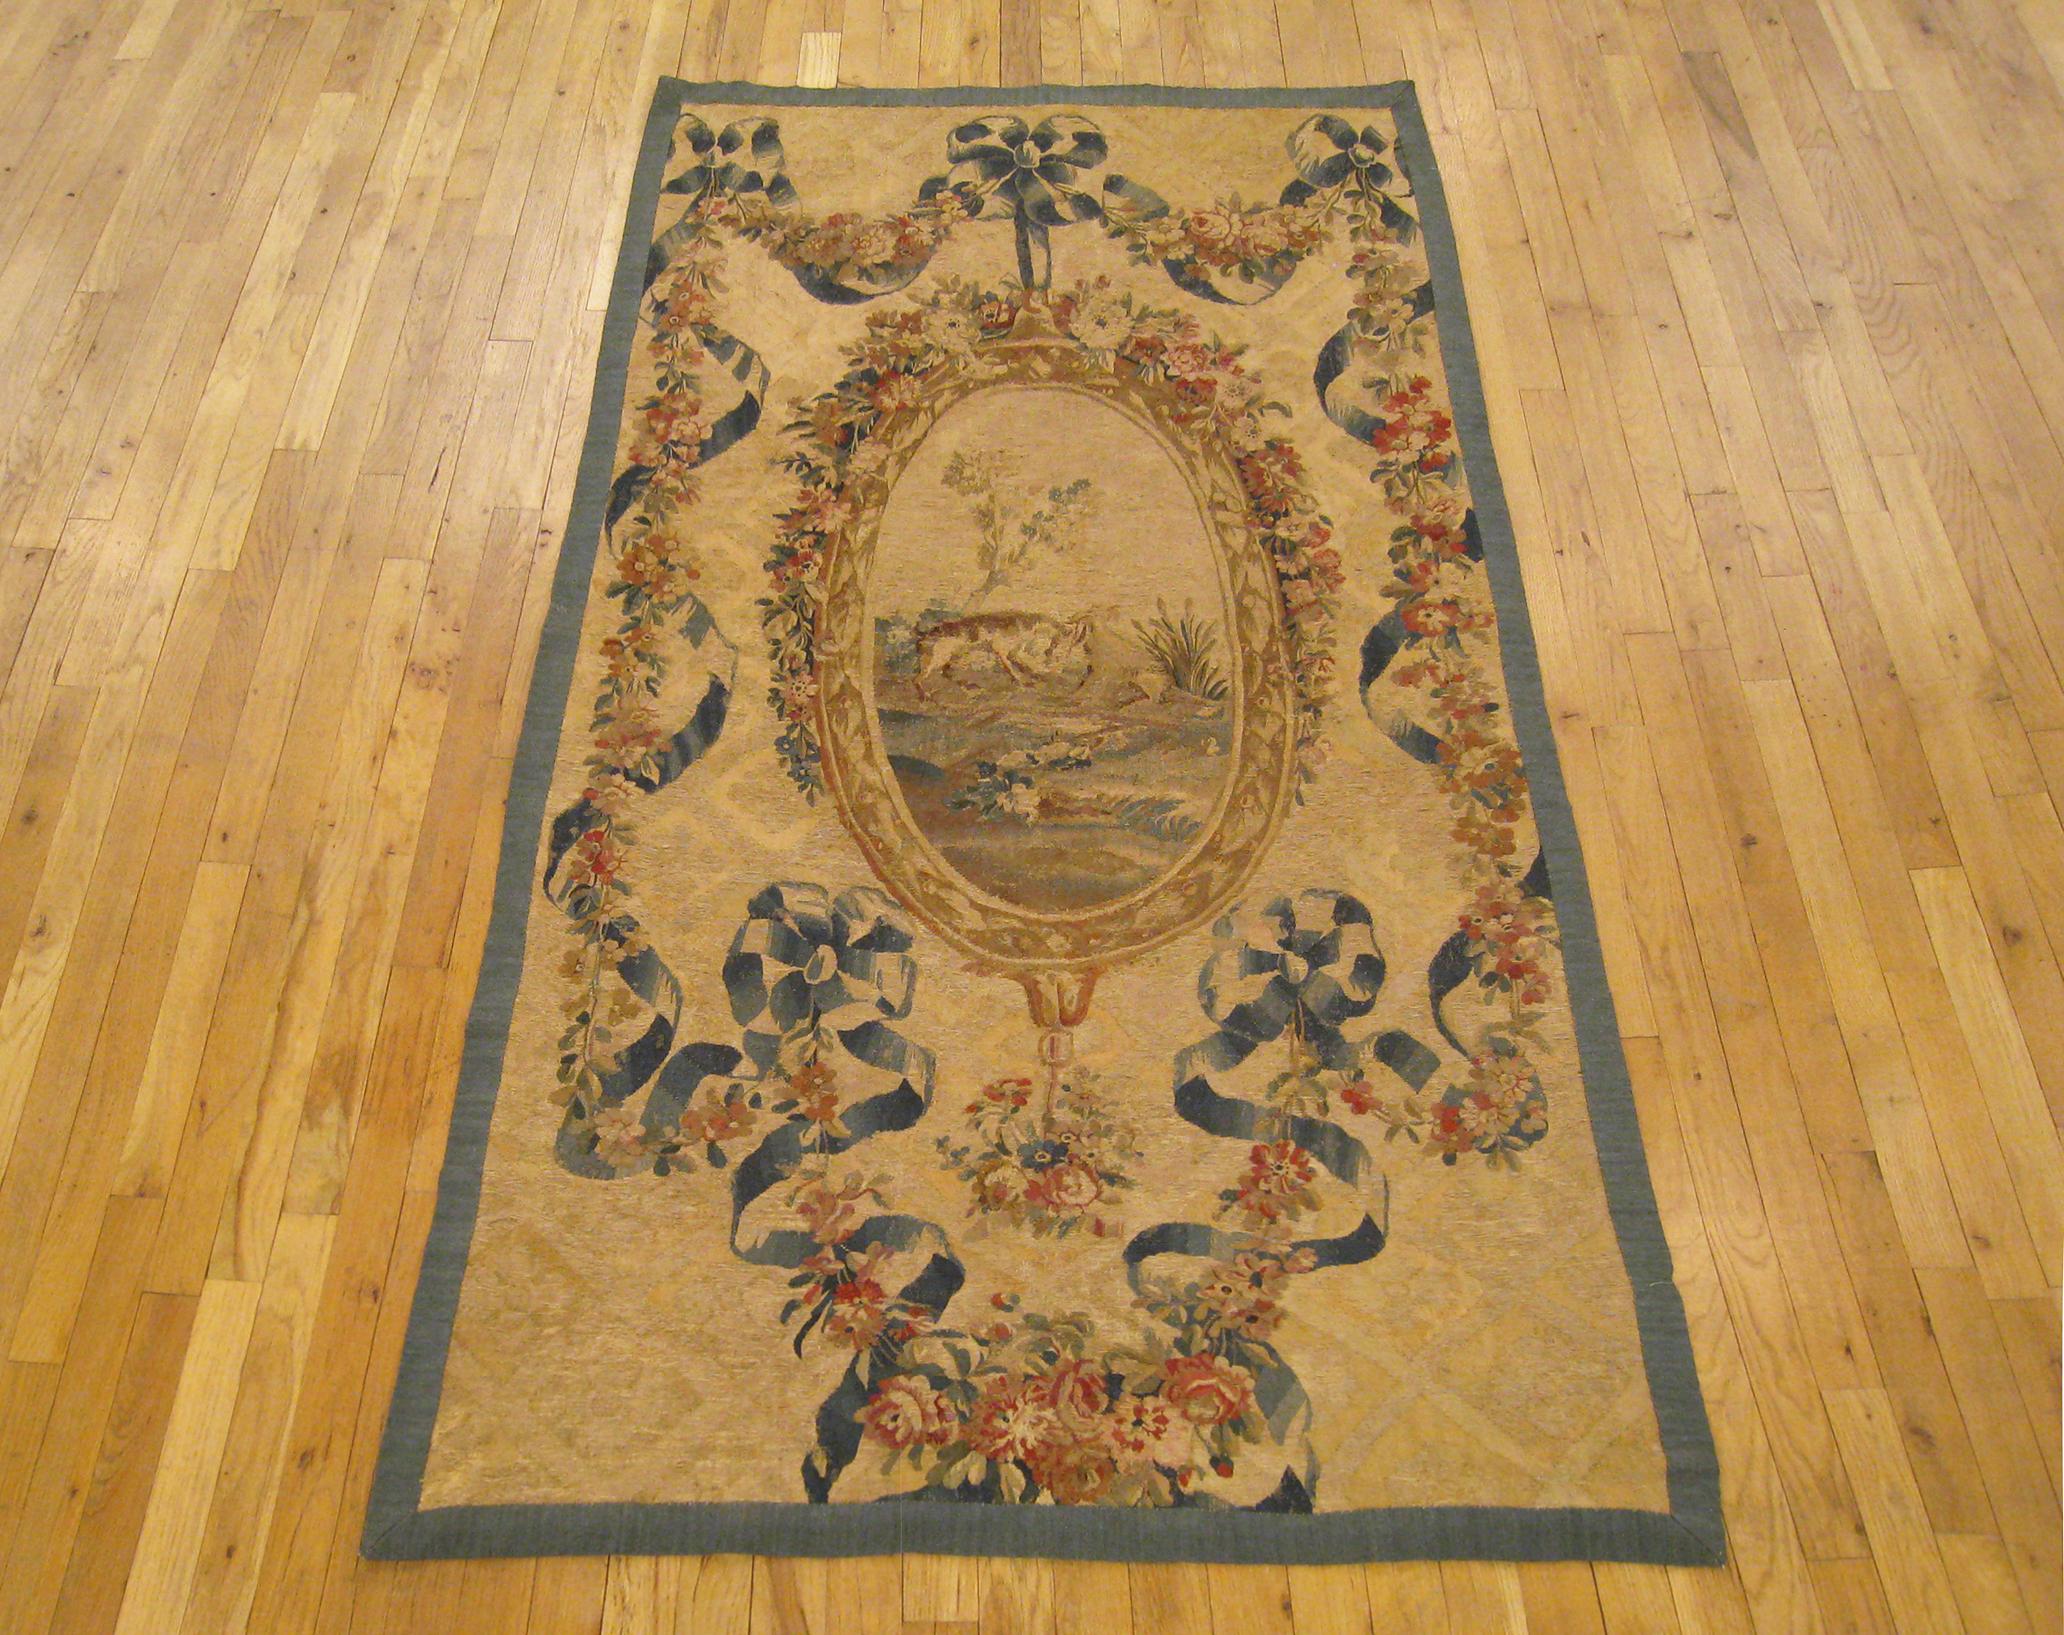 An antique French Aubusson needlepoint tapestry from the 19th century, featuring an oval pendant at center, which envisions an idyllic landscape. The pendant medallion is surrounded by floral garlands and ribbon ties, with soft color tones in the